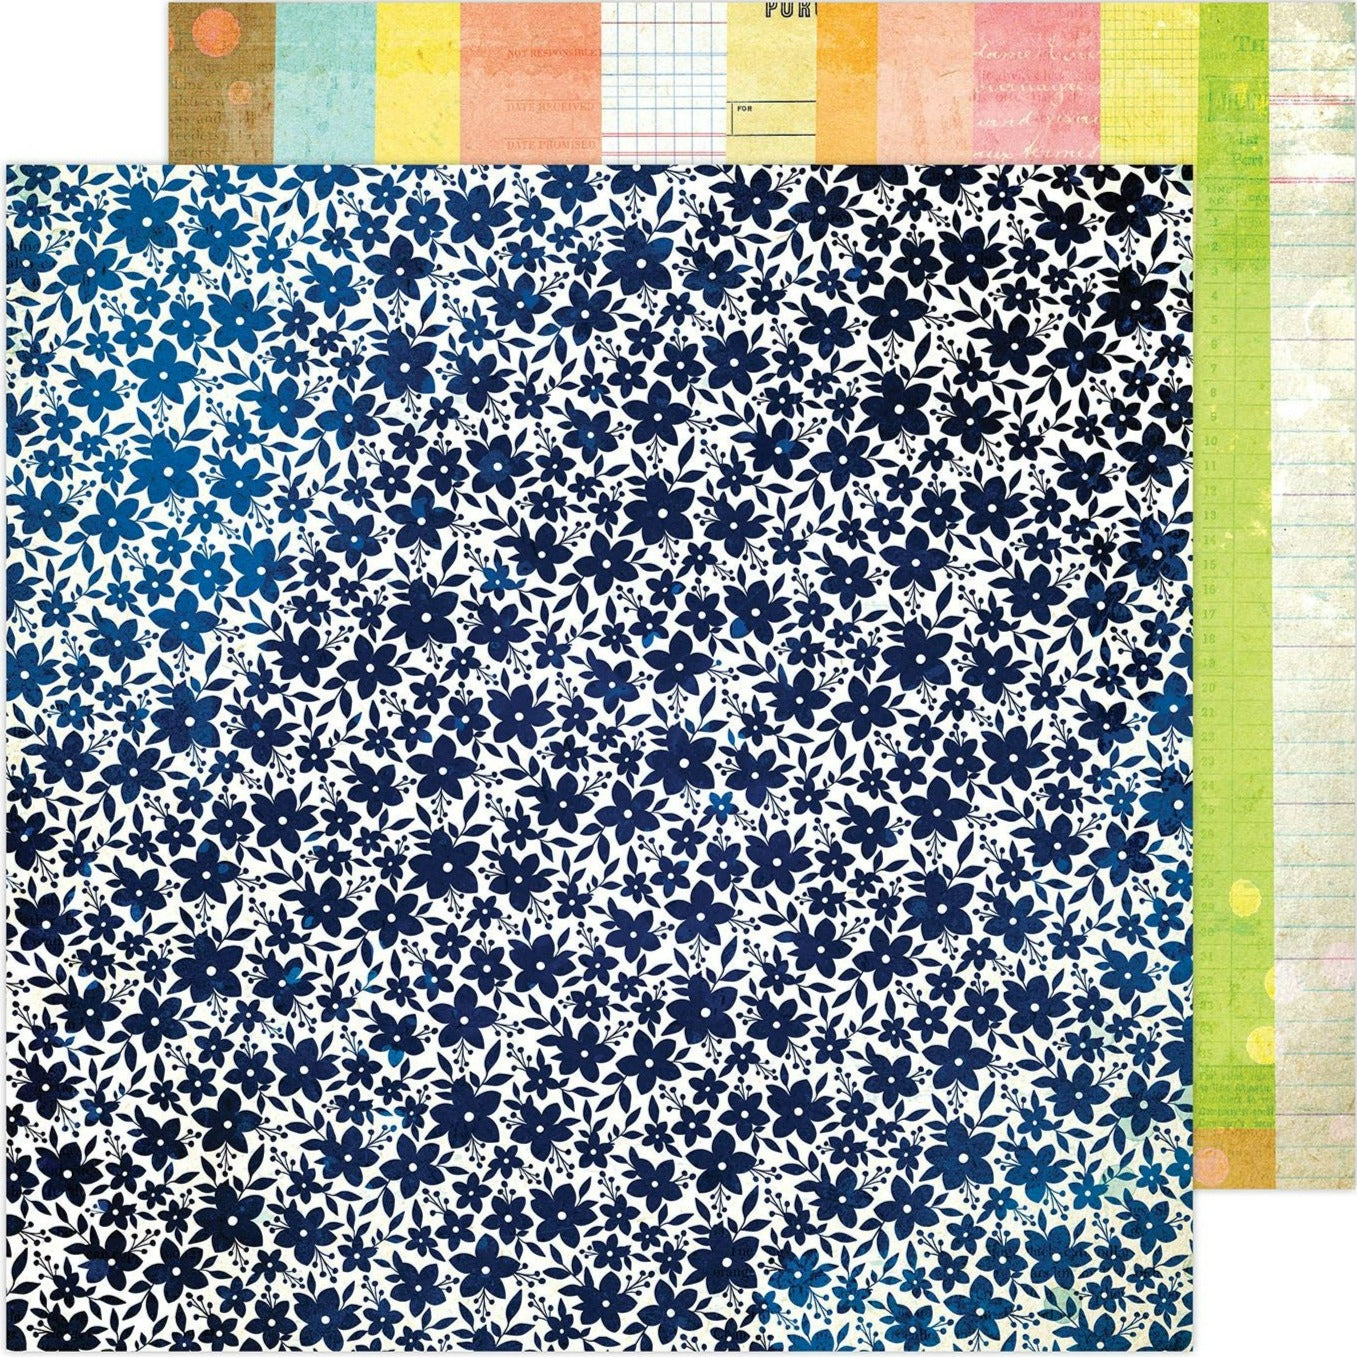 (Side A - navy blue floral on a distressed white background, Side B - paper scrap stripes in multiple pastel colors and patterns)